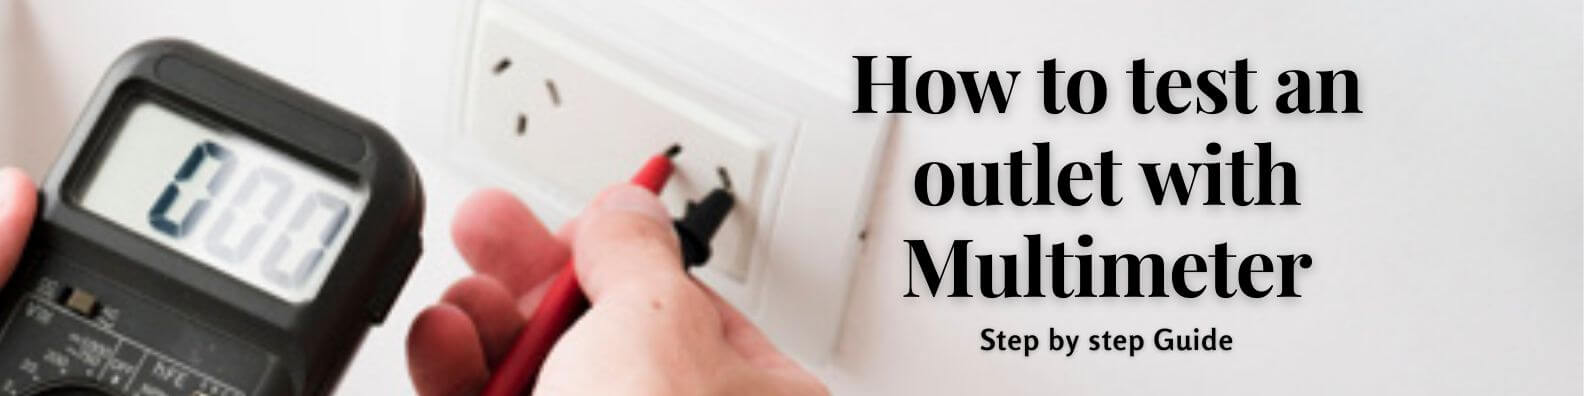 how to test an outlet with a multimeter